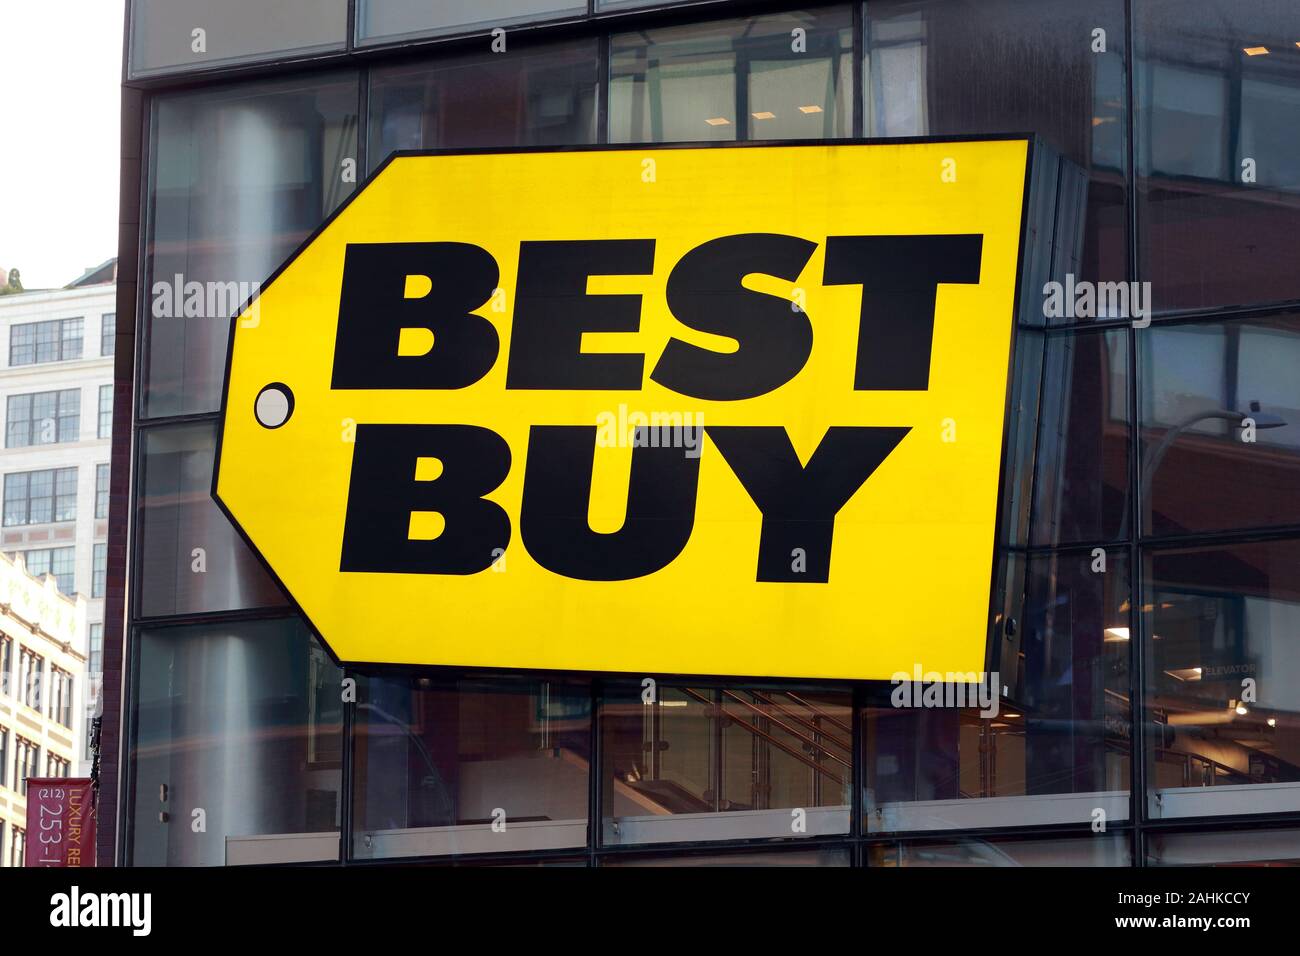 A gigantic Best Buy logo on a building with glass and steel construction in the Union Square neighborhood of Manhattan, New York, NY Stock Photo